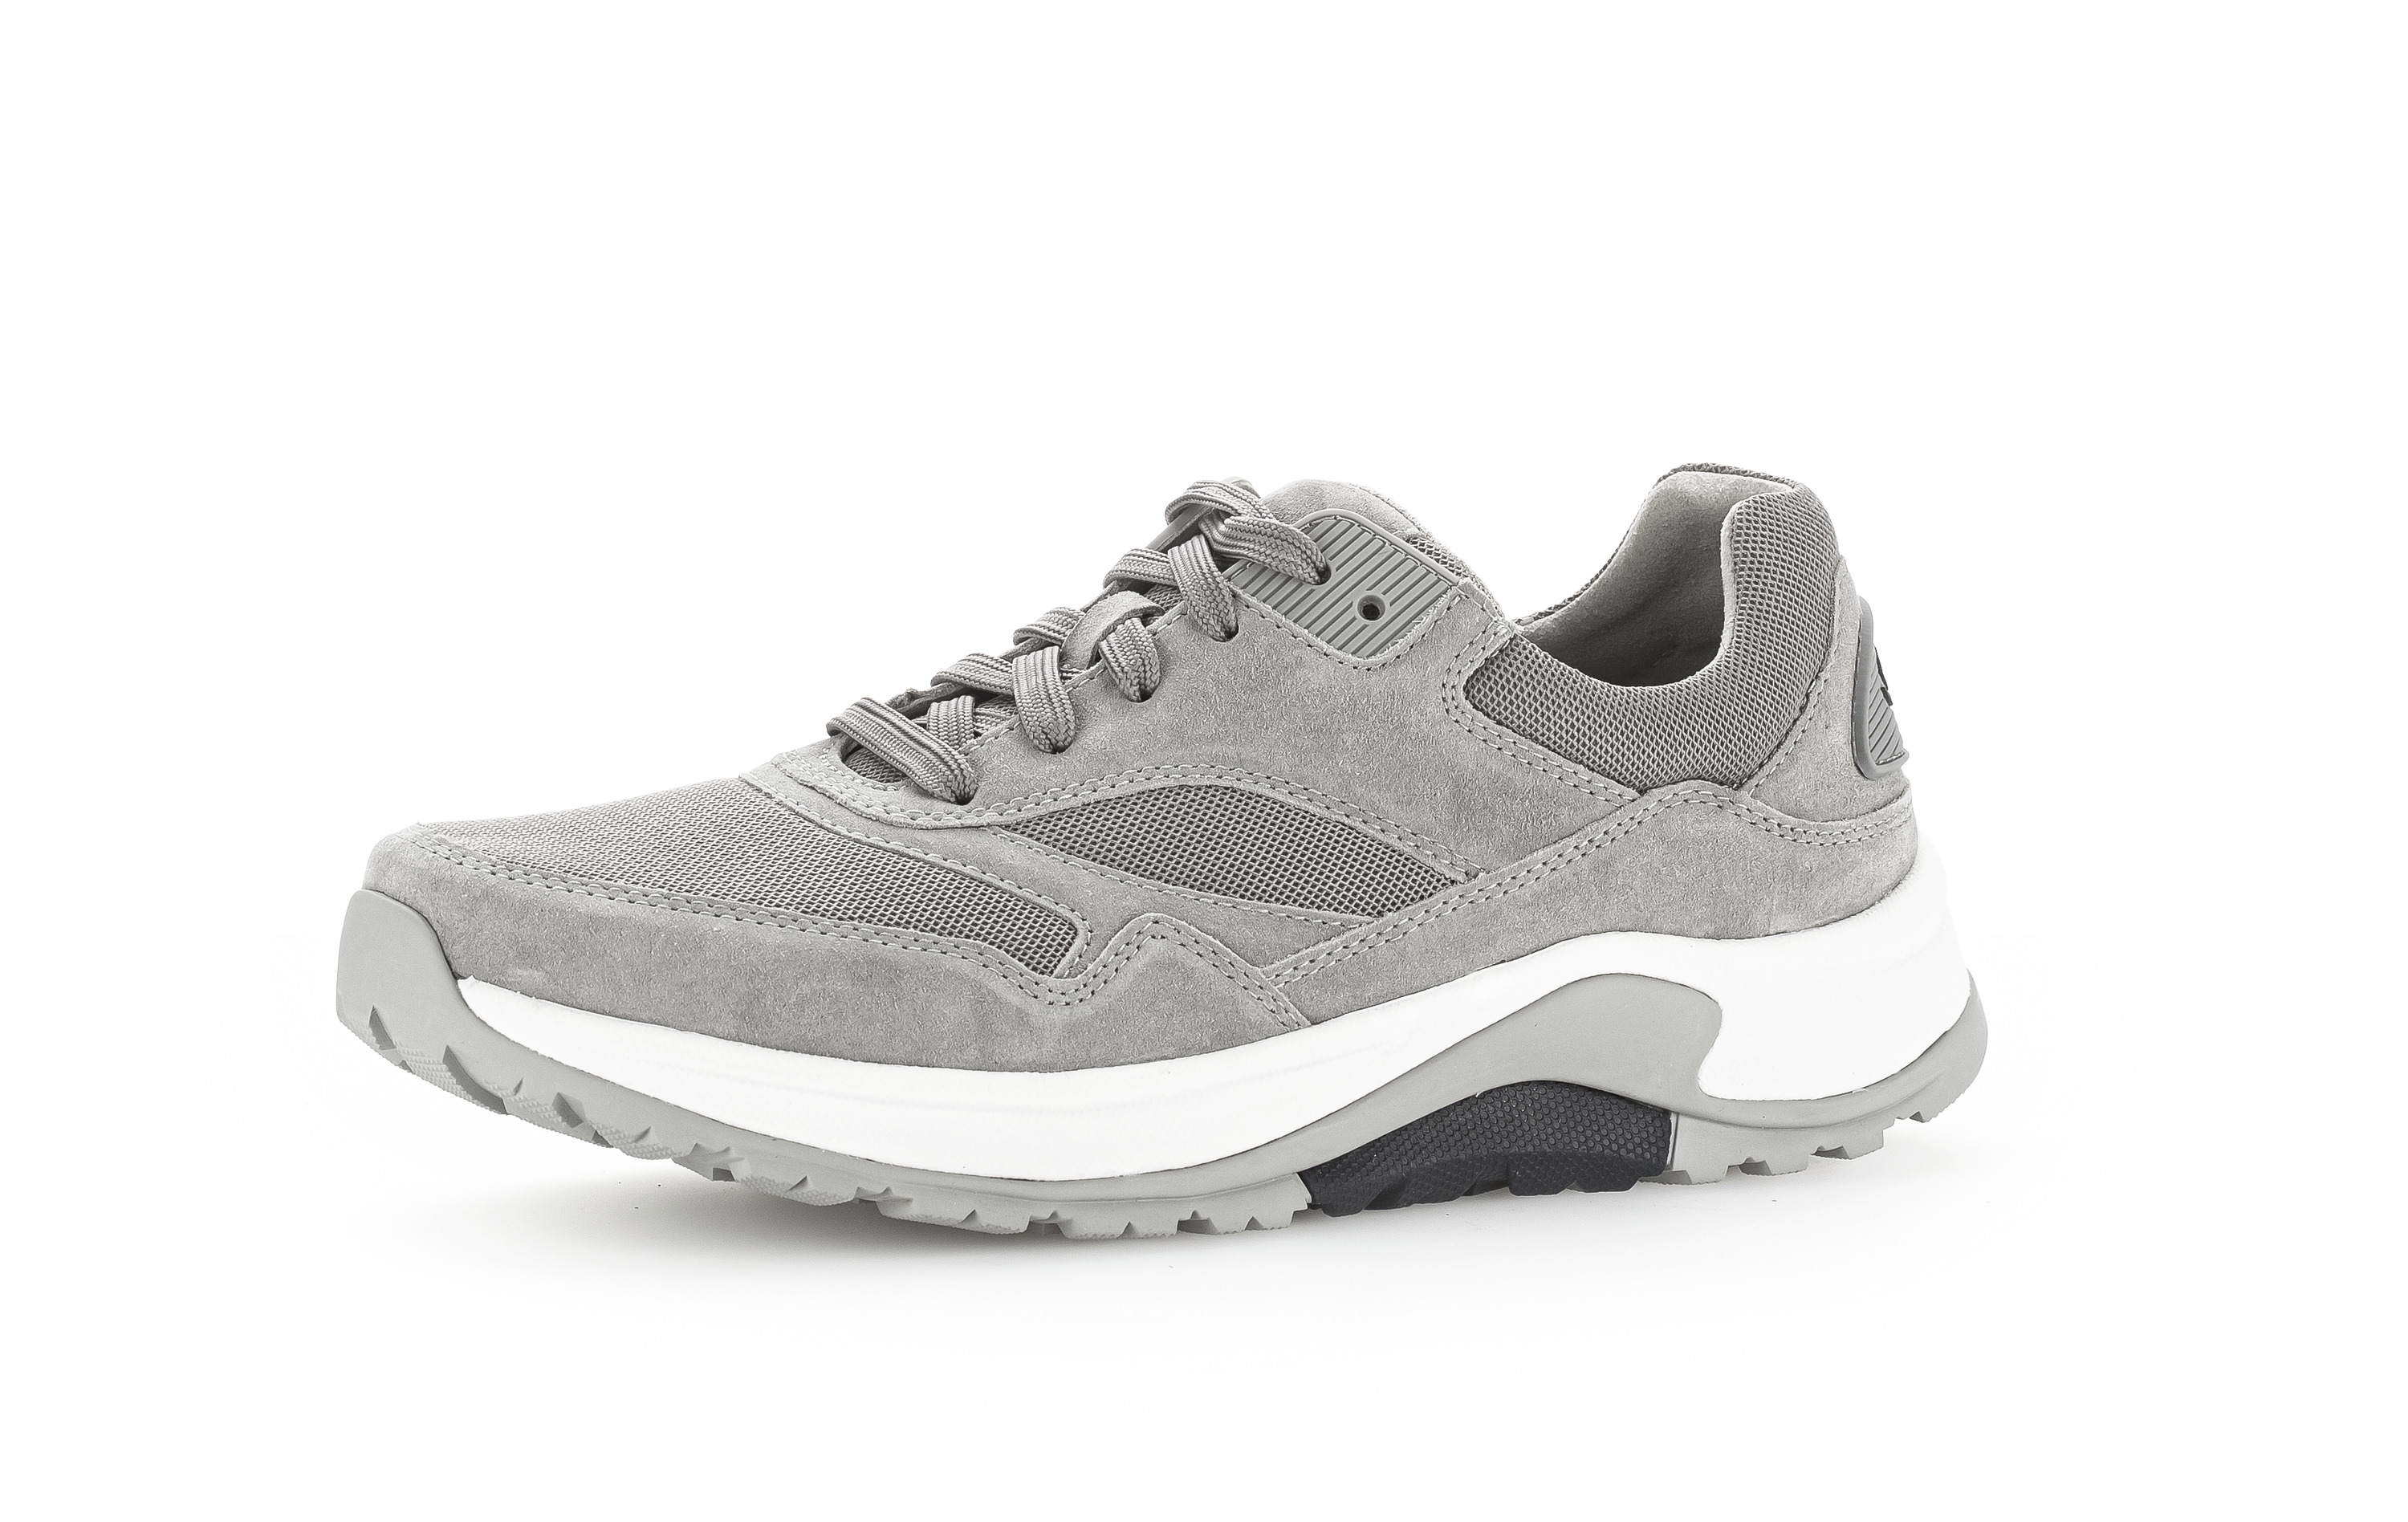 Sneaker - Grey Leather/Textile